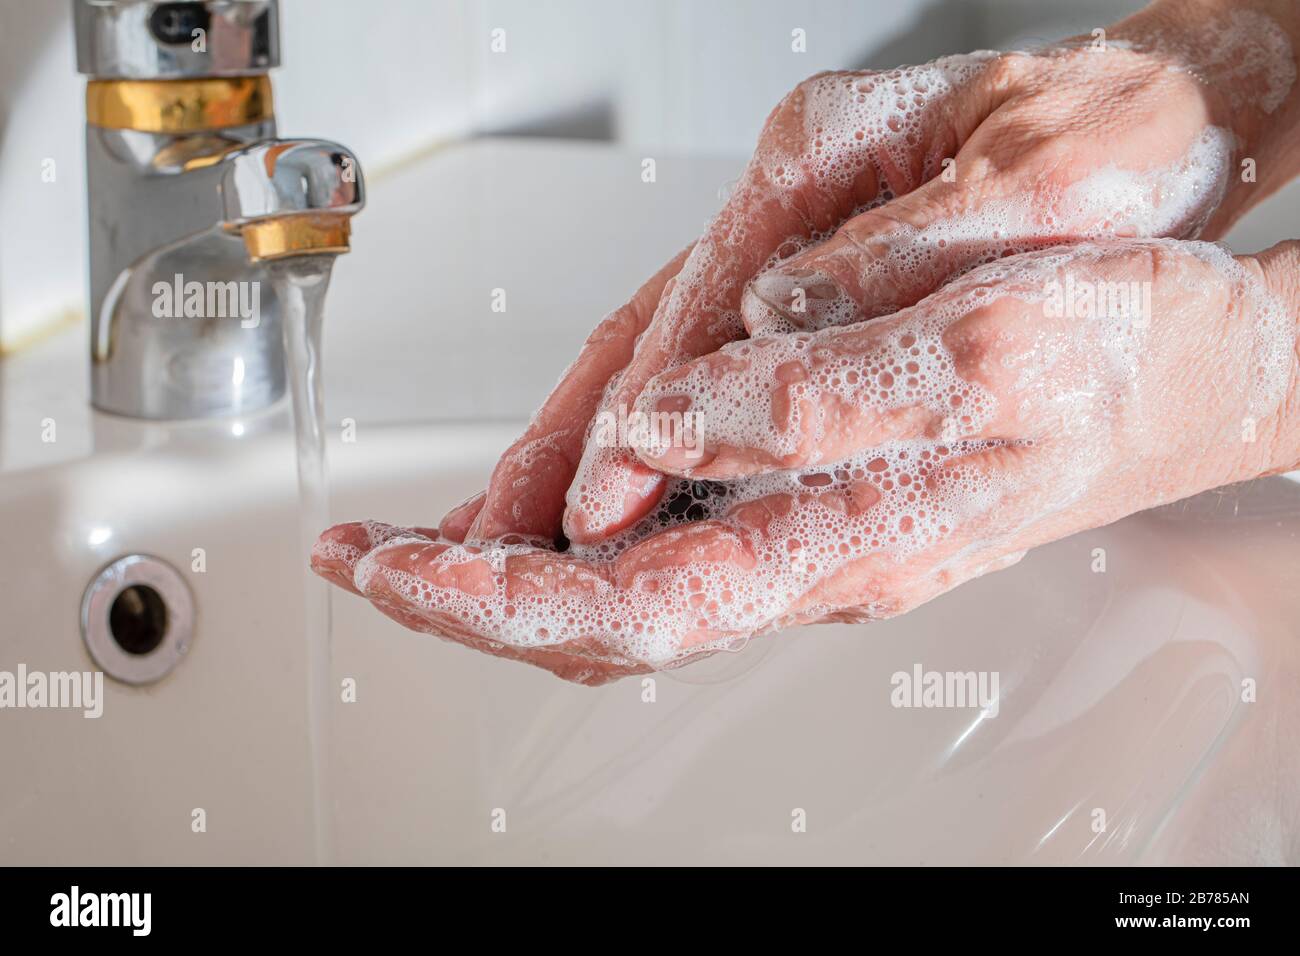 Male hands being washed hands in the bathroom, The hands are frothy of soap. and there is a running faucet in the background.  Corona virus covid 19 s Stock Photo